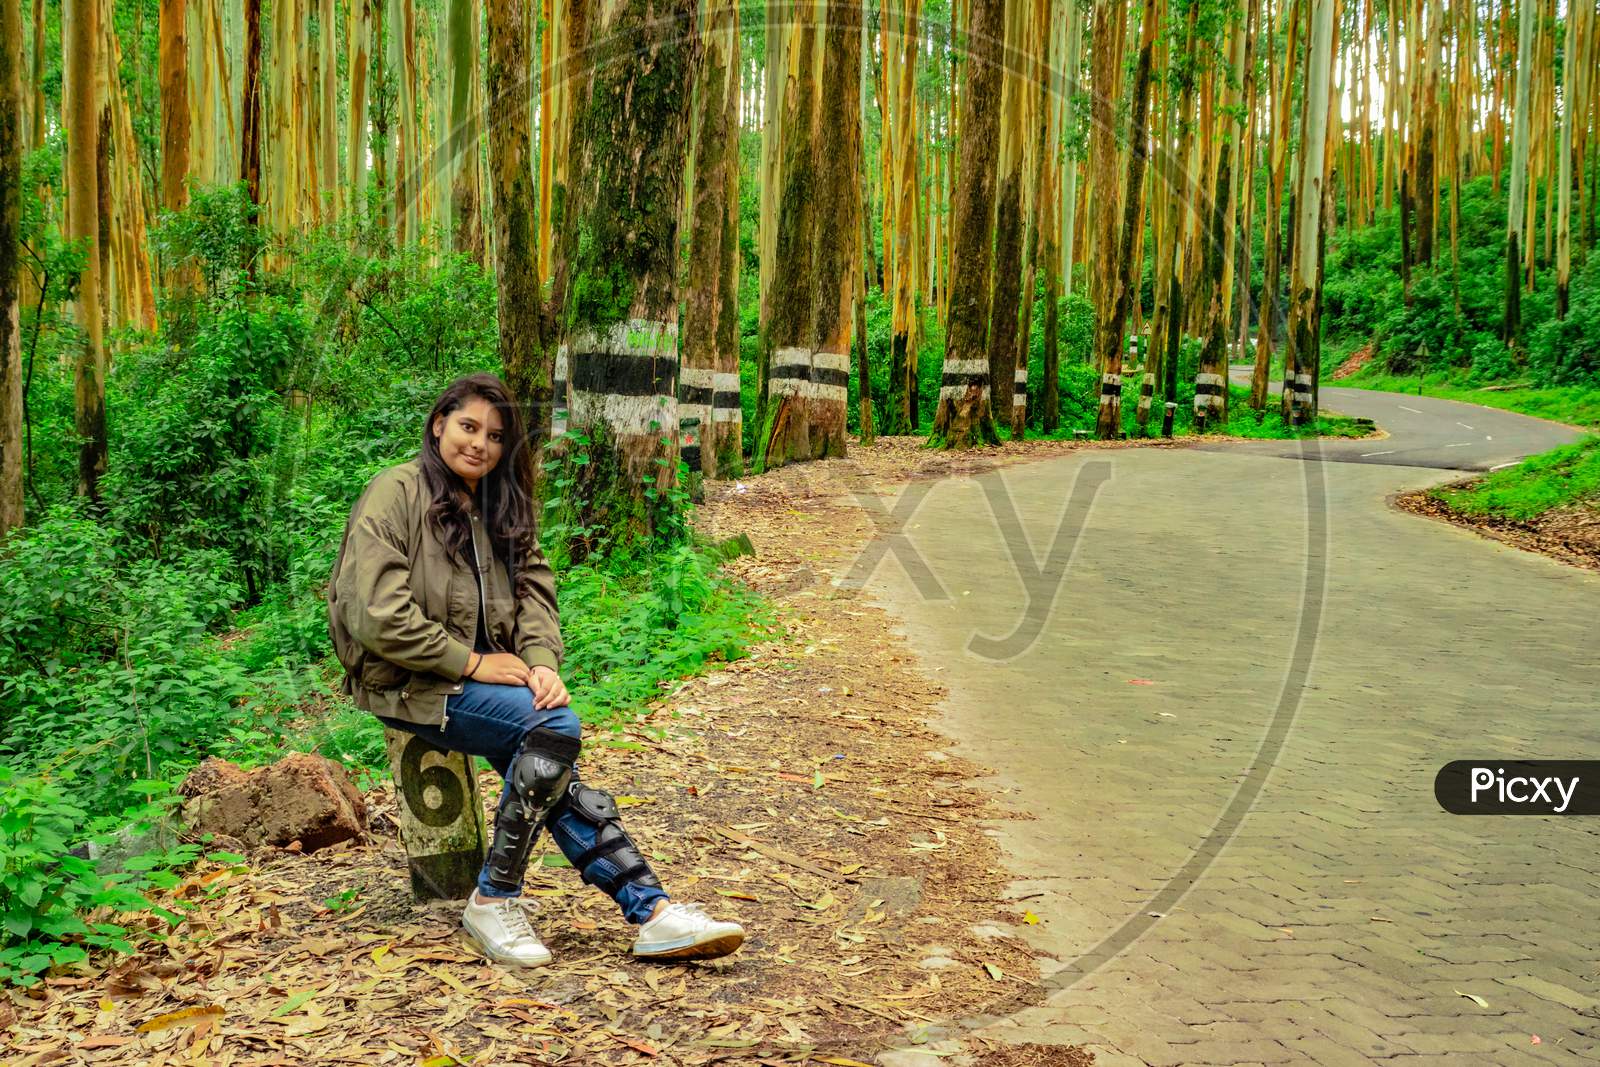 Girl Isolated On Empty Tarmac Road With Lush Green Forest